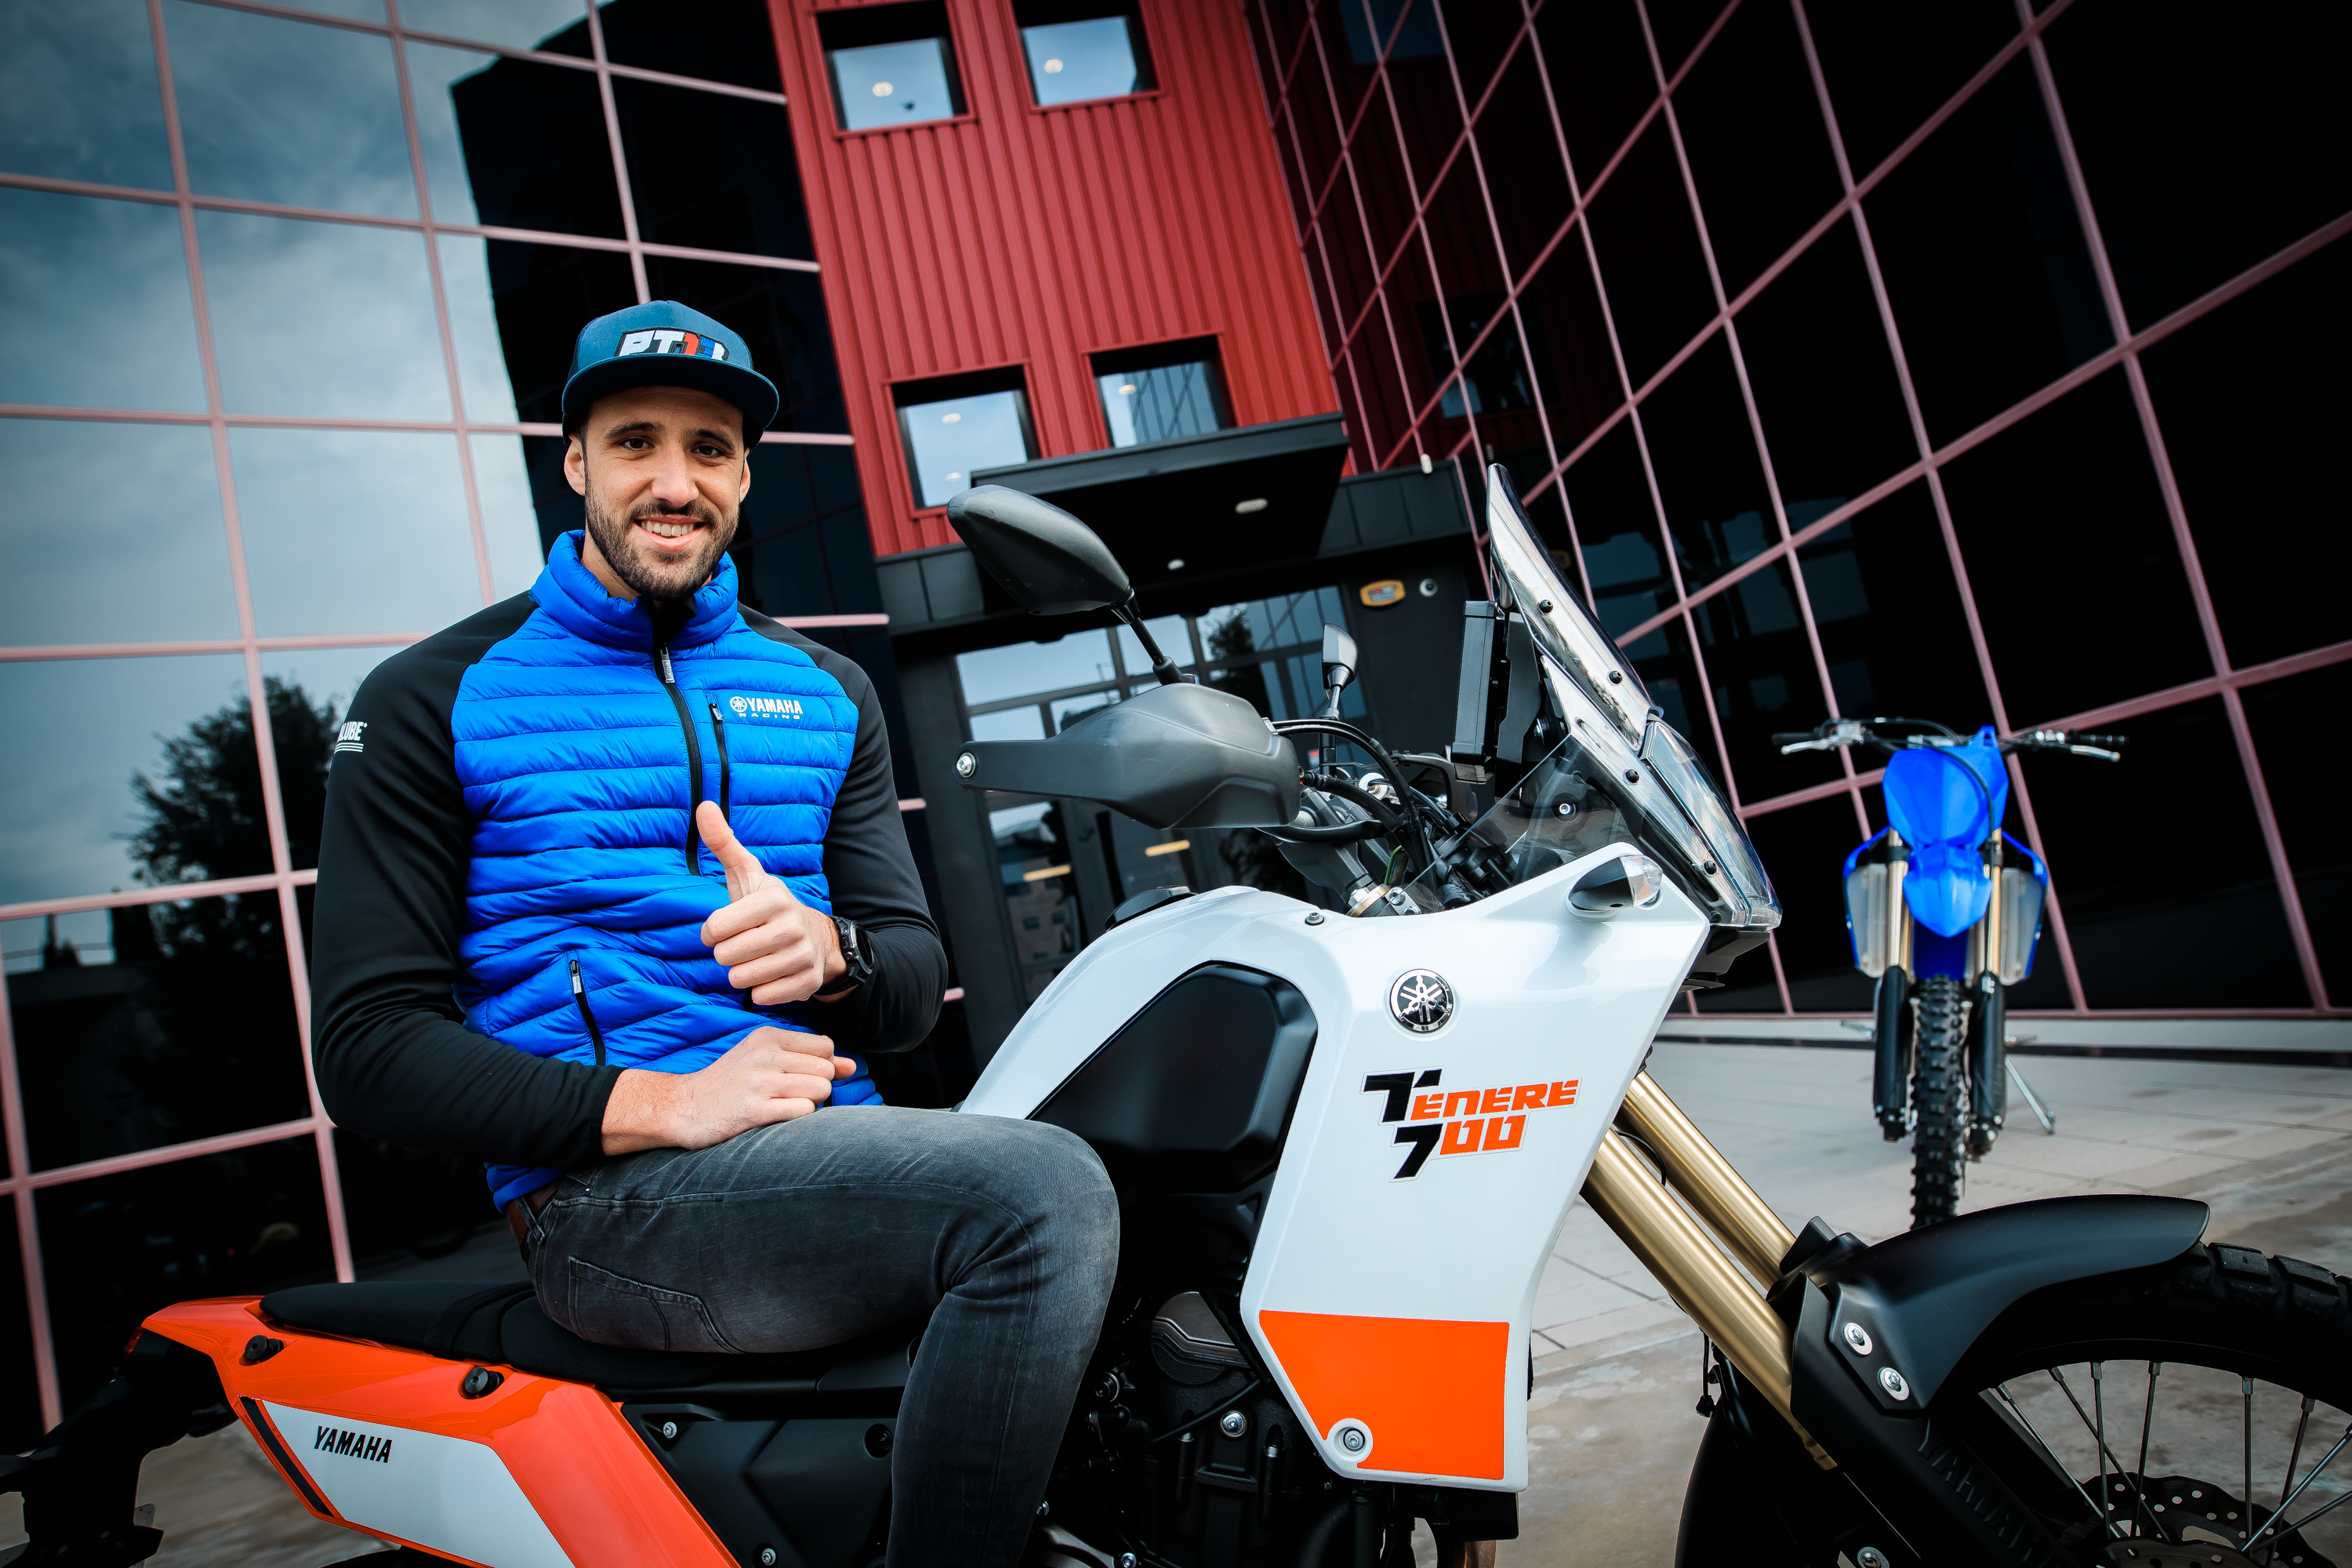 Pol Tarres moves to Yamaha – Spaniard to race two-stroke YZ in Hard Enduro